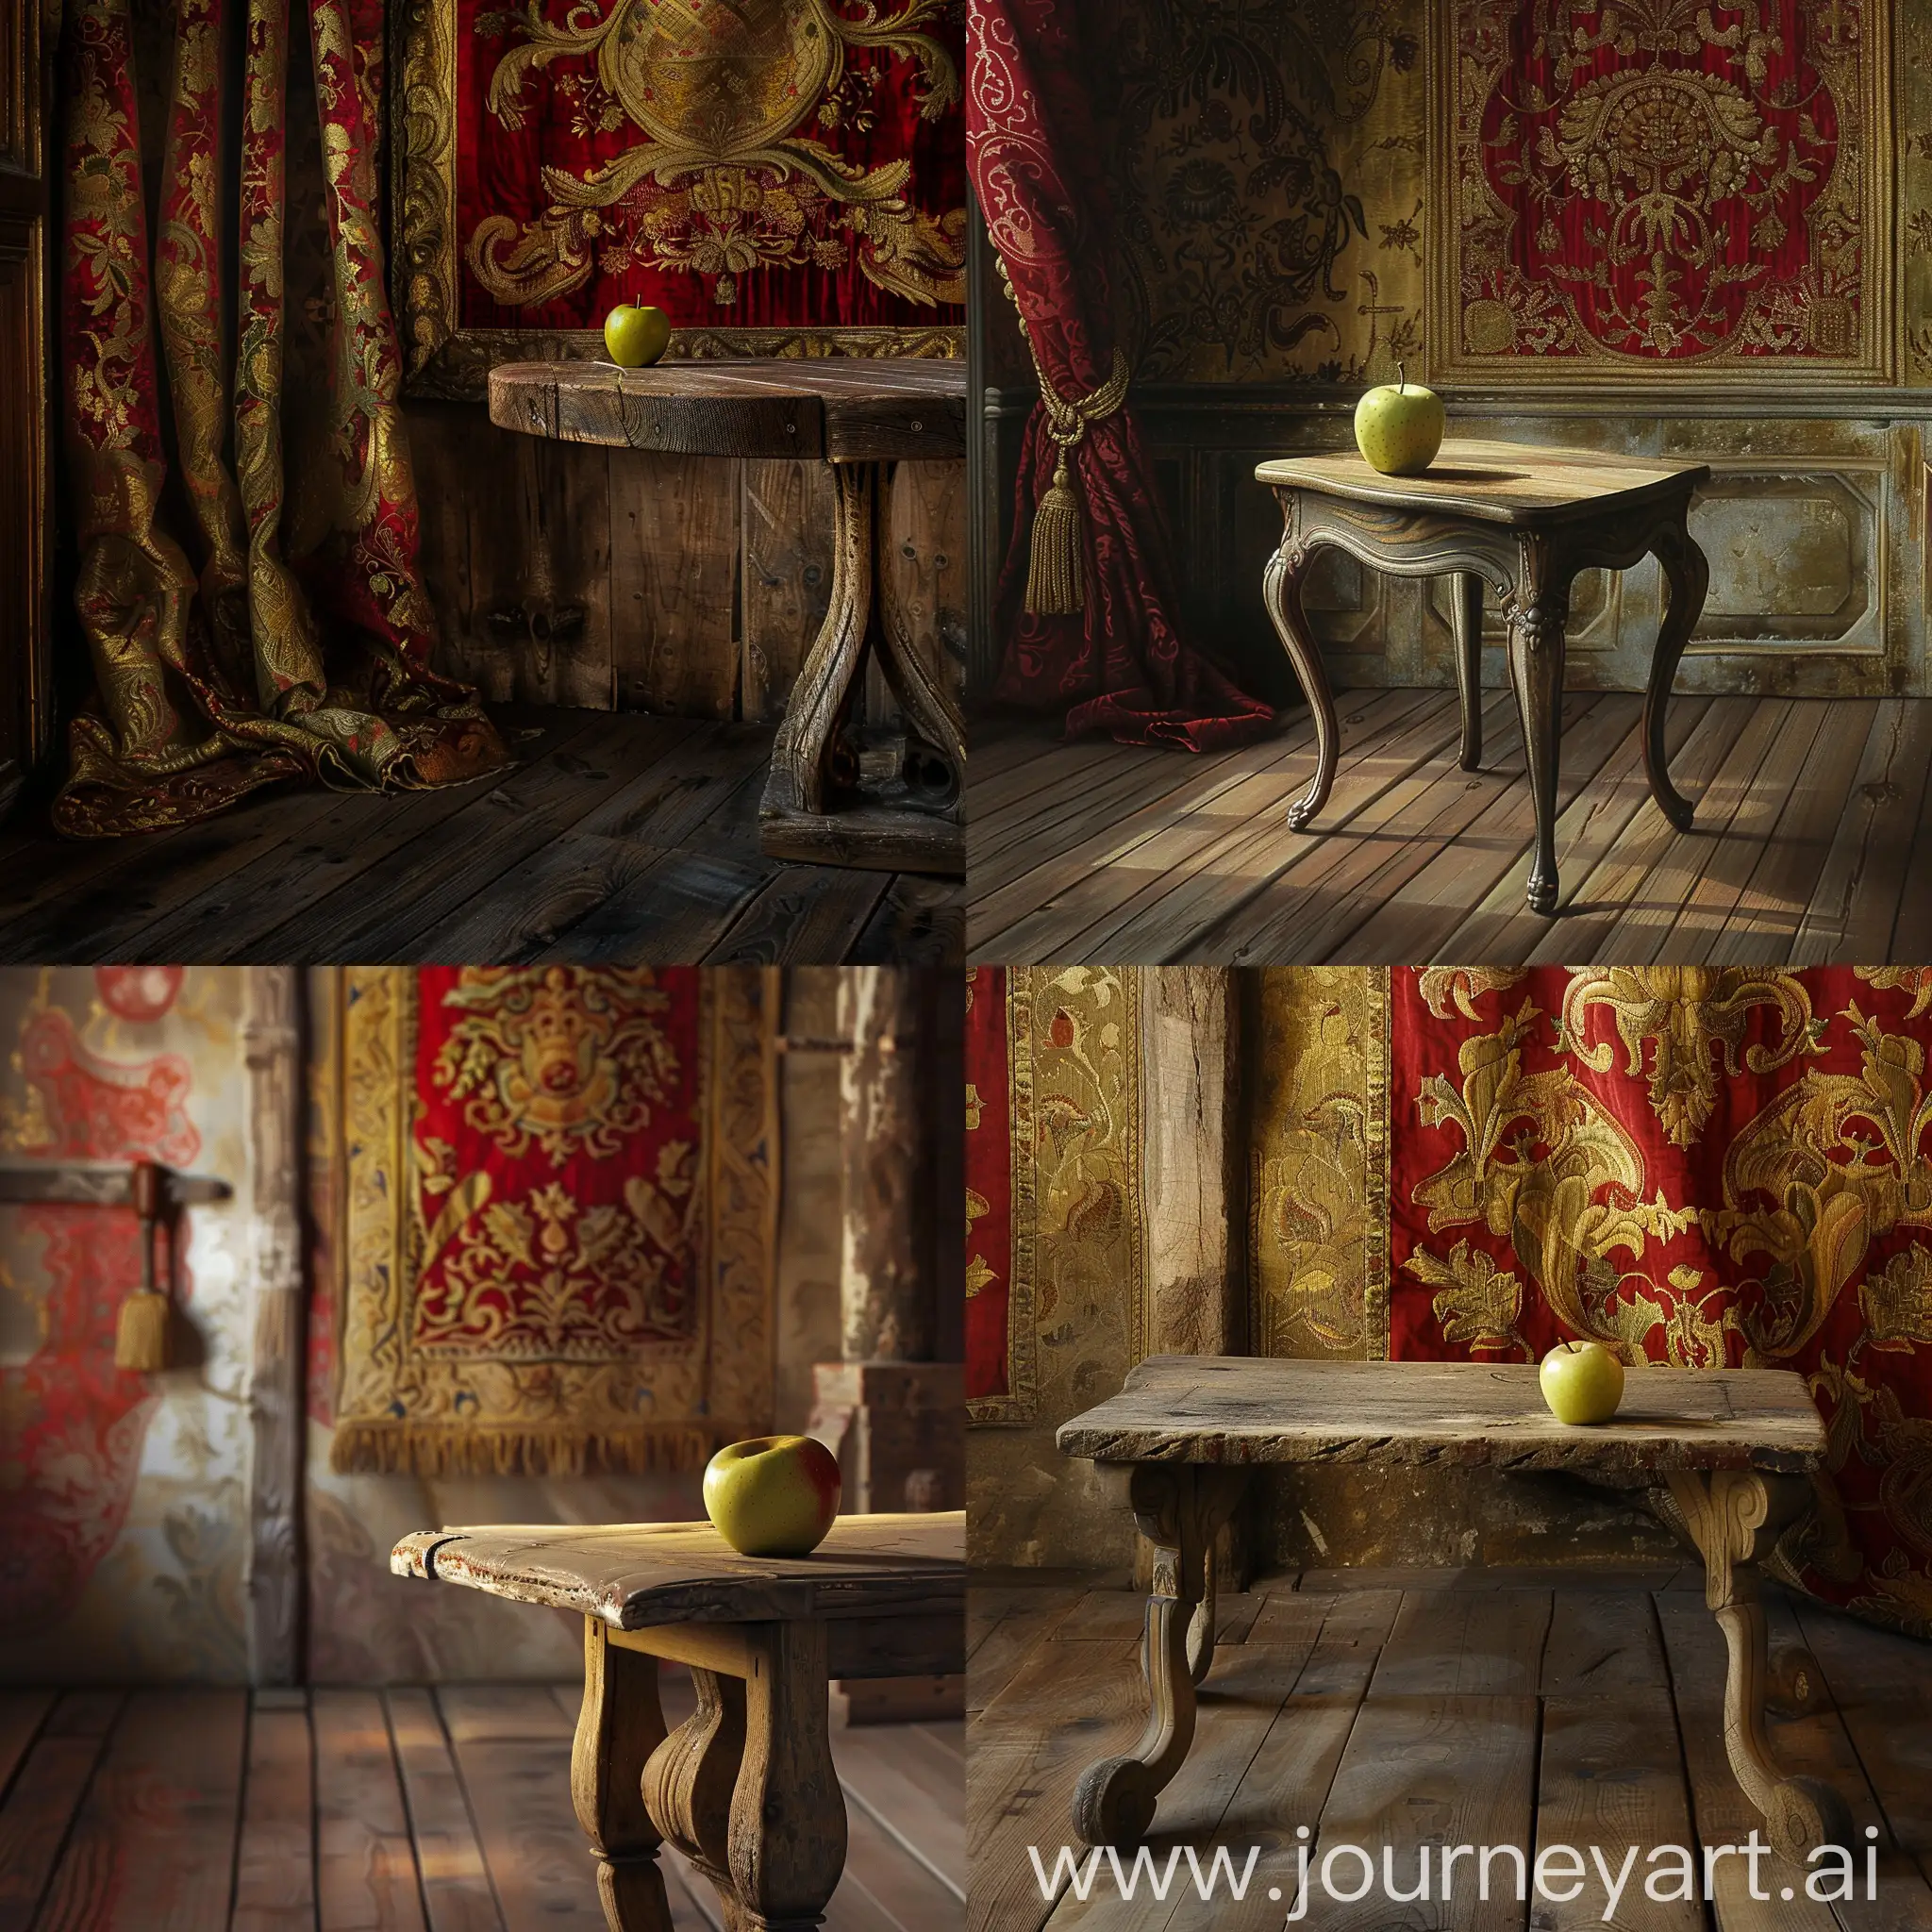 Apple-on-Wooden-Table-in-Room-with-Red-and-Gold-Tapestry